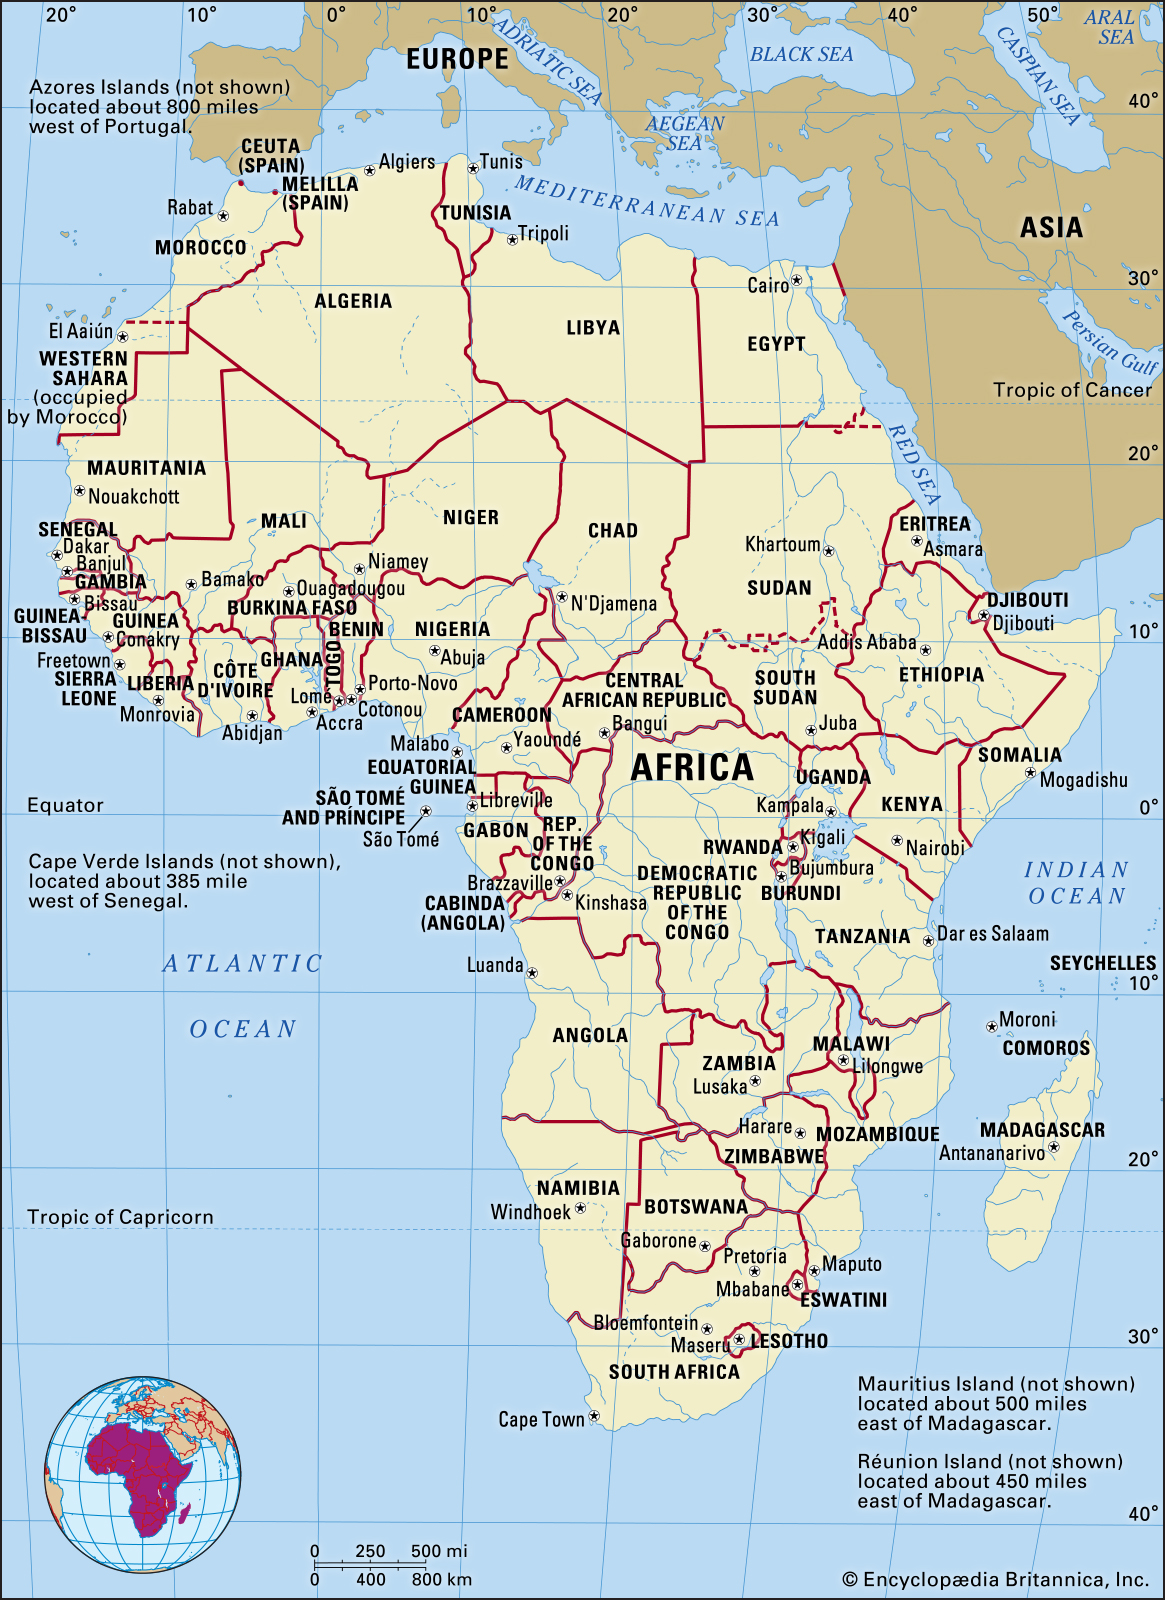 Africa. History, People, Countries, Map, & Facts